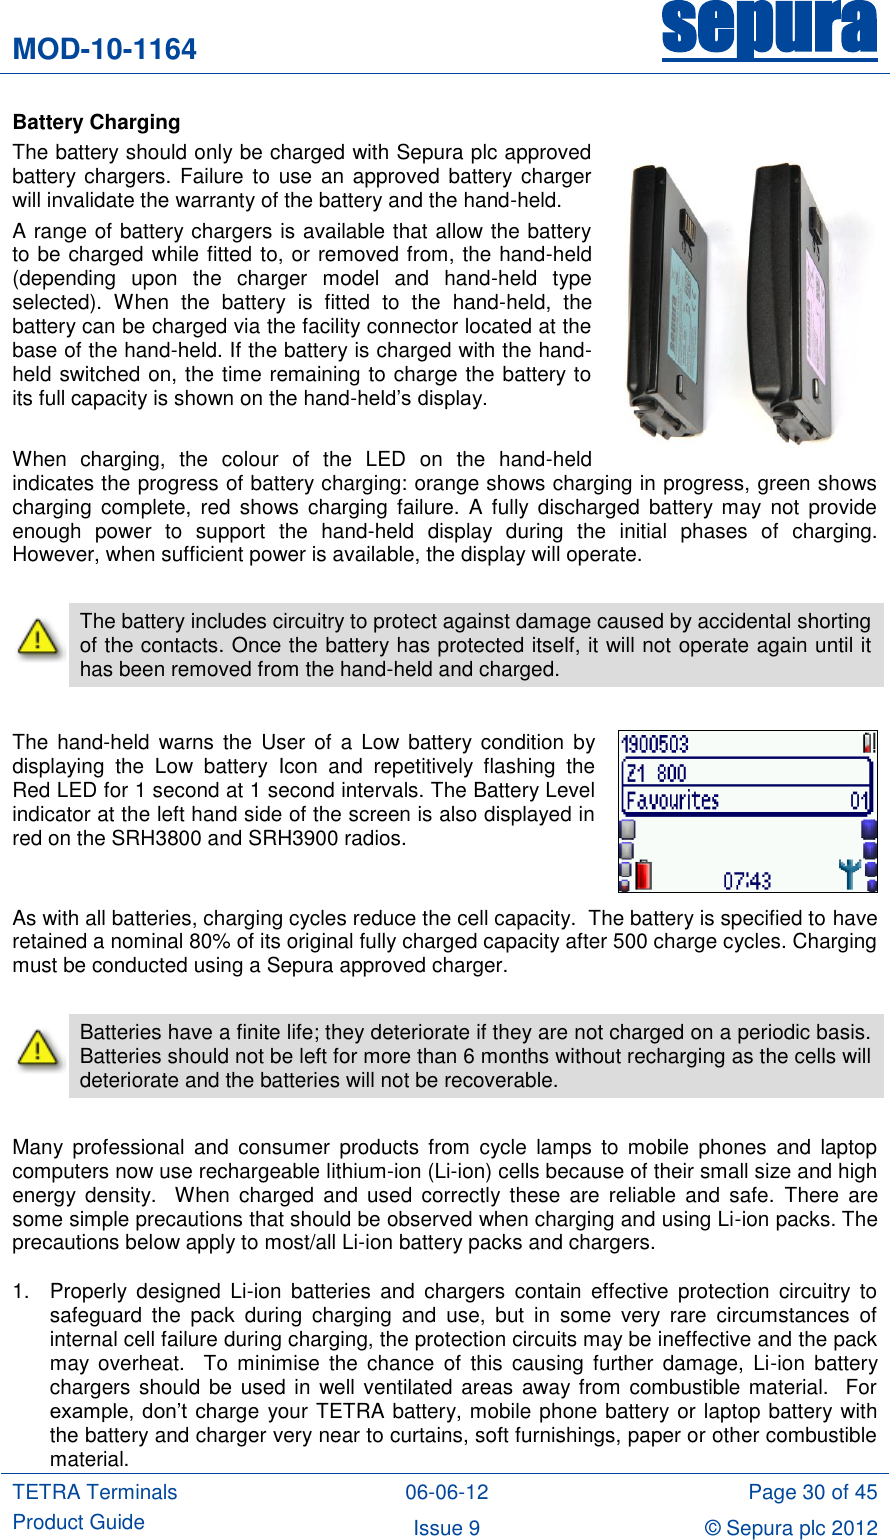 MOD-10-1164 sepura  TETRA Terminals Product Guide 06-06-12 Page 30 of 45 Issue 9 © Sepura plc 2012   Battery Charging The battery should only be charged with Sepura plc approved battery chargers.  Failure to  use  an approved battery charger will invalidate the warranty of the battery and the hand-held. A range of battery chargers is available that allow the battery to be charged while fitted to, or removed from, the hand-held (depending  upon  the  charger  model  and  hand-held  type selected).  When  the  battery  is  fitted  to  the  hand-held,  the battery can be charged via the facility connector located at the base of the hand-held. If the battery is charged with the hand-held switched on, the time remaining to charge the battery to its full capacity is shown on the hand-held‟s display.  When  charging,  the  colour  of  the  LED  on  the  hand-held indicates the progress of battery charging: orange shows charging in progress, green shows charging  complete,  red  shows charging  failure.  A  fully  discharged  battery  may  not  provide enough  power  to  support  the  hand-held  display  during  the  initial  phases  of  charging. However, when sufficient power is available, the display will operate.   The battery includes circuitry to protect against damage caused by accidental shorting of the contacts. Once the battery has protected itself, it will not operate again until it has been removed from the hand-held and charged.  The  hand-held  warns the  User  of  a Low  battery  condition by displaying  the  Low  battery  Icon  and  repetitively  flashing  the Red LED for 1 second at 1 second intervals. The Battery Level indicator at the left hand side of the screen is also displayed in red on the SRH3800 and SRH3900 radios.  As with all batteries, charging cycles reduce the cell capacity.  The battery is specified to have retained a nominal 80% of its original fully charged capacity after 500 charge cycles. Charging must be conducted using a Sepura approved charger.   Batteries have a finite life; they deteriorate if they are not charged on a periodic basis.  Batteries should not be left for more than 6 months without recharging as the cells will deteriorate and the batteries will not be recoverable.  Many  professional  and  consumer  products  from  cycle  lamps  to mobile phones  and  laptop computers now use rechargeable lithium-ion (Li-ion) cells because of their small size and high energy  density.    When  charged  and  used  correctly  these are  reliable and  safe.  There  are some simple precautions that should be observed when charging and using Li-ion packs. The precautions below apply to most/all Li-ion battery packs and chargers. 1.  Properly  designed  Li-ion  batteries  and  chargers  contain  effective  protection  circuitry  to safeguard  the  pack  during  charging  and  use,  but  in  some  very  rare  circumstances  of internal cell failure during charging, the protection circuits may be ineffective and the pack may  overheat.    To  minimise  the  chance  of  this  causing  further  damage,  Li-ion  battery chargers should be used in well ventilated areas  away from combustible material.  For example,  don‟t  charge your TETRA battery, mobile phone battery or laptop battery with the battery and charger very near to curtains, soft furnishings, paper or other combustible material. 